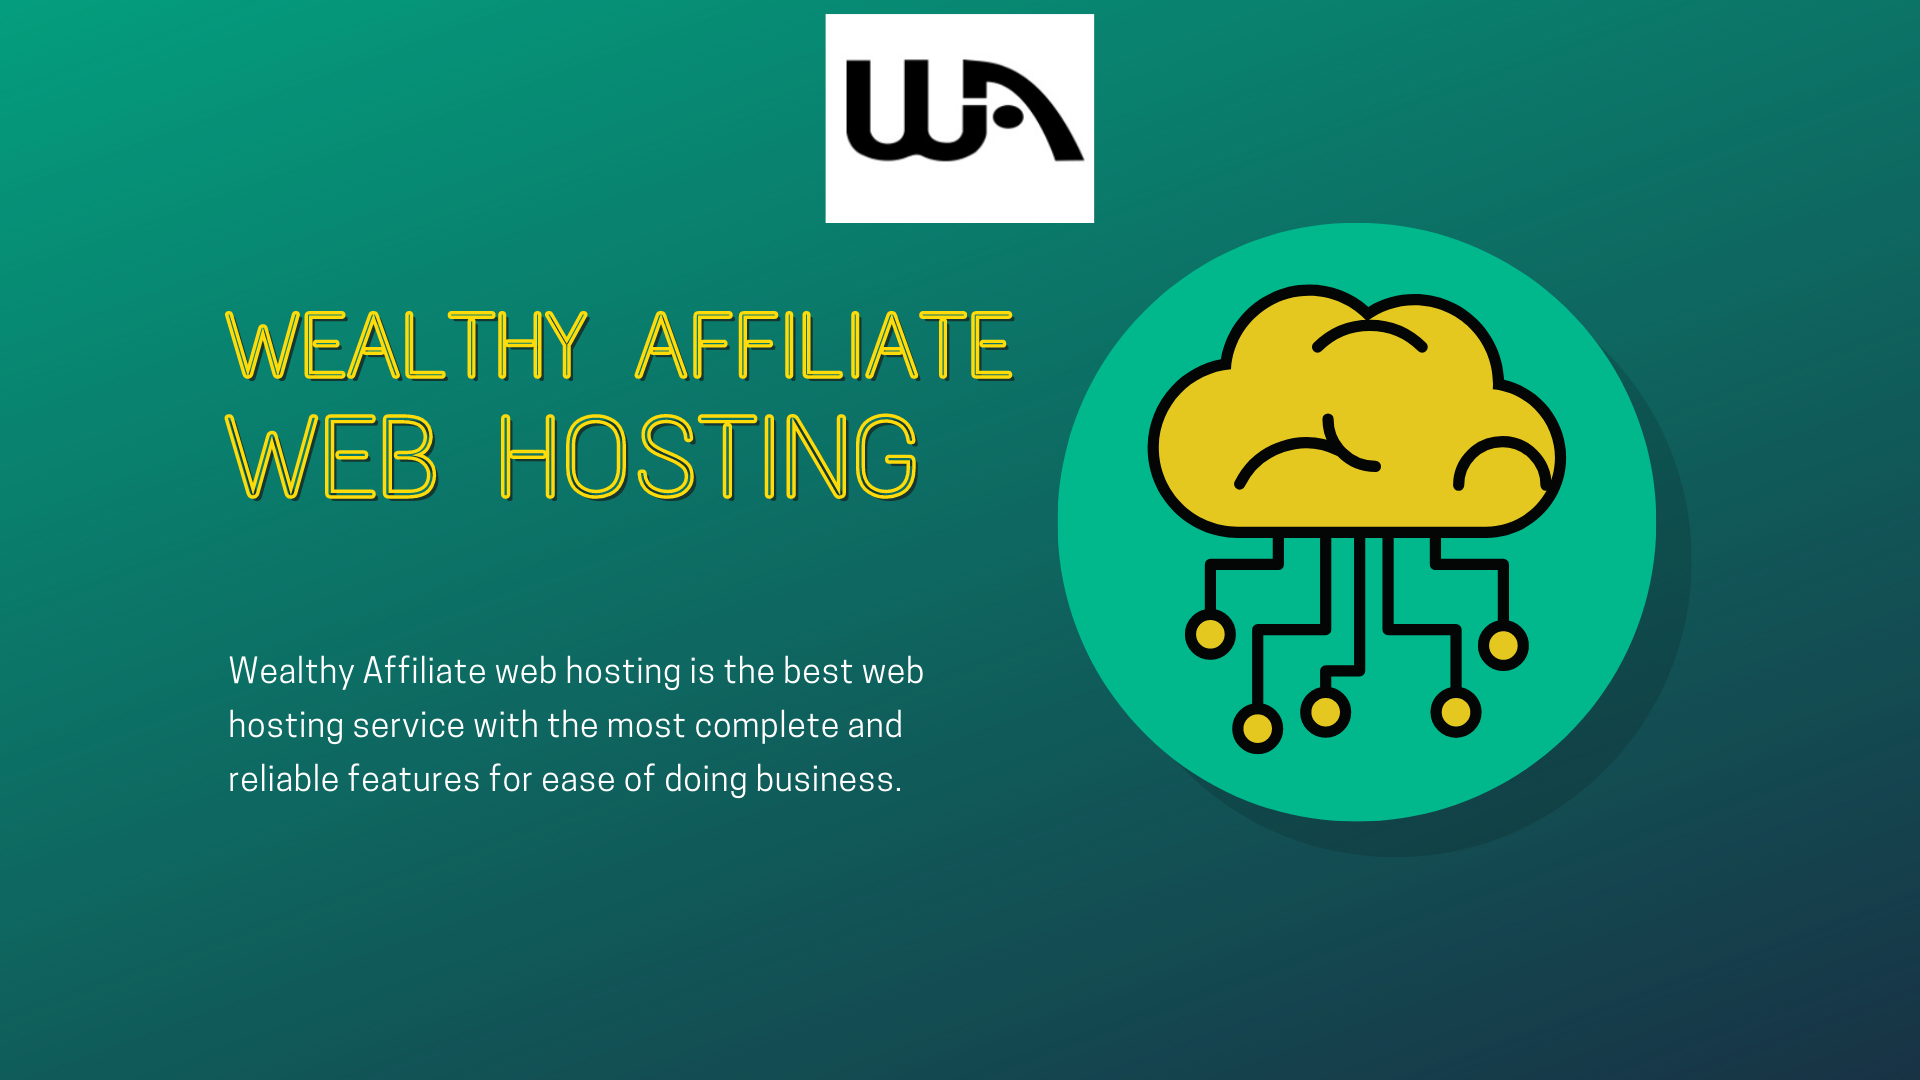 Wealth Affiliate Hosting summary of services advert